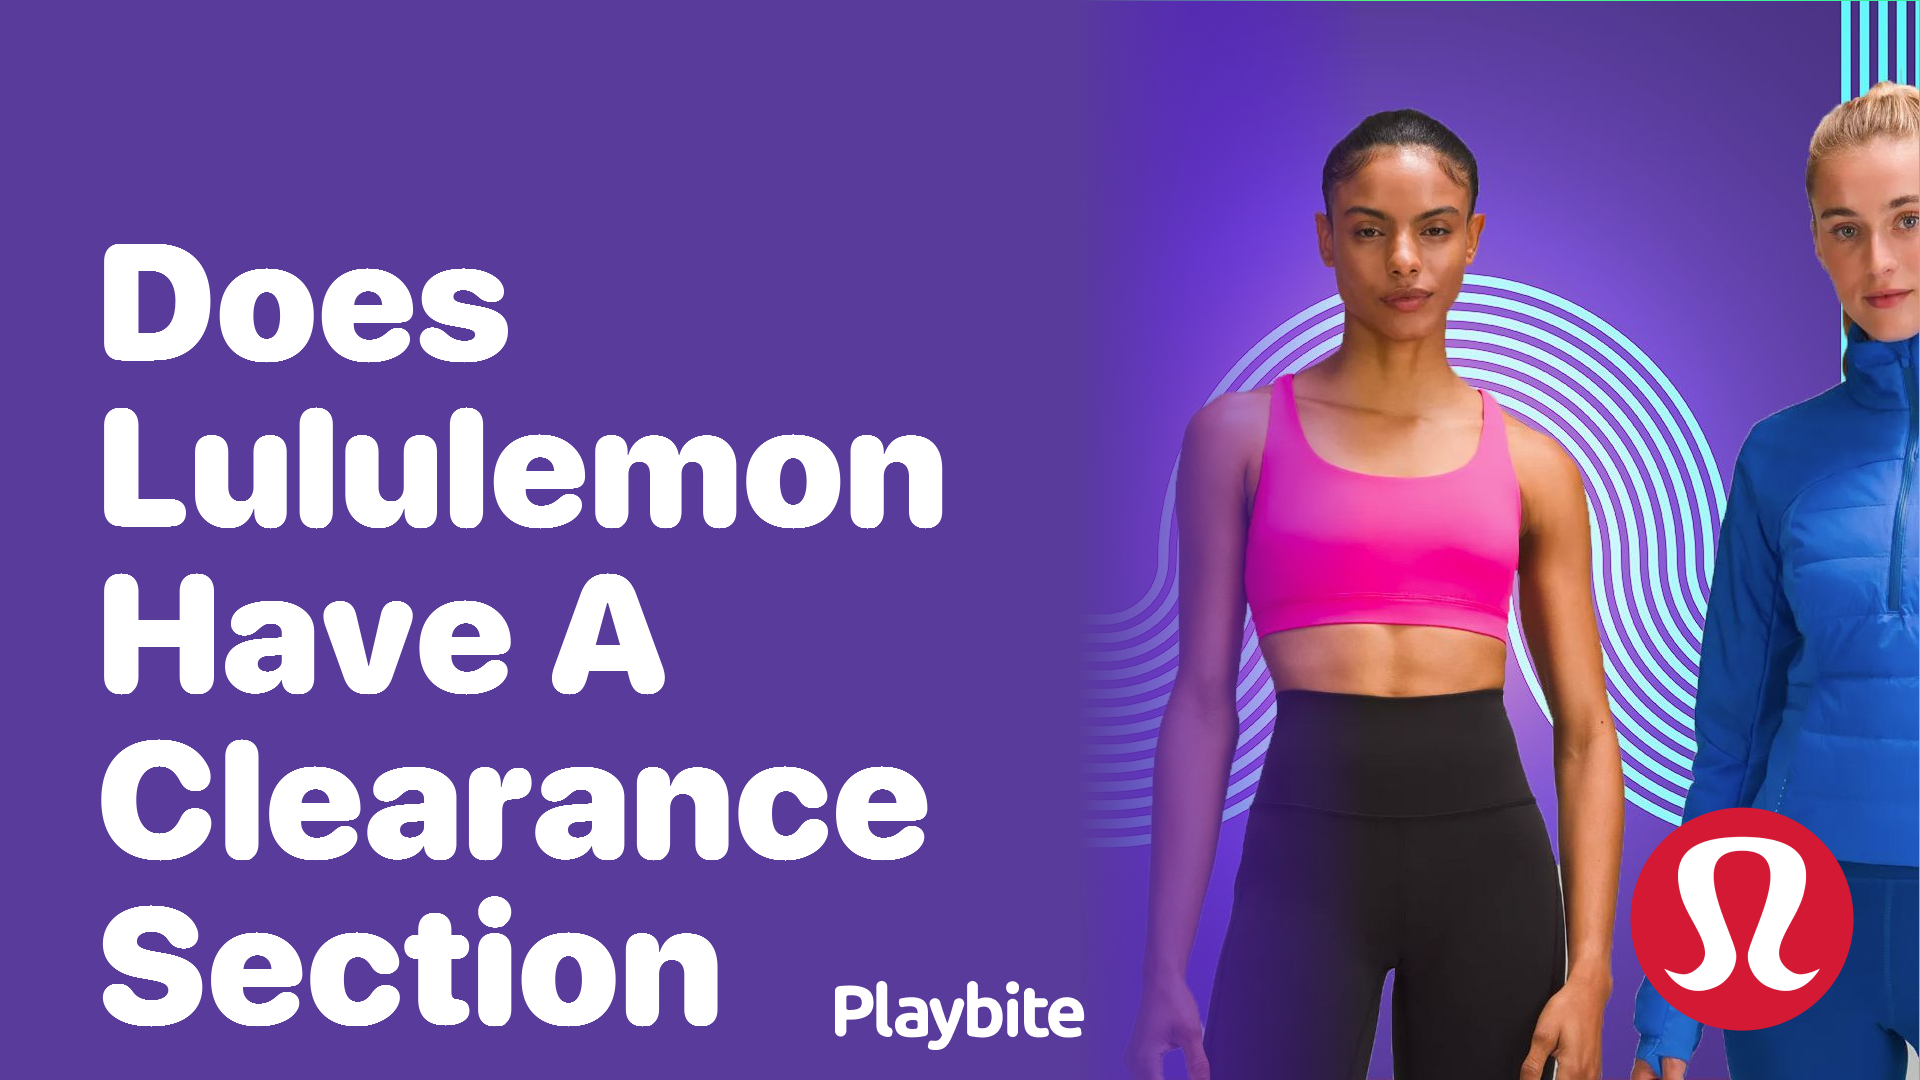 Does Lululemon Have a Clearance Section? Find Out Here! - Playbite